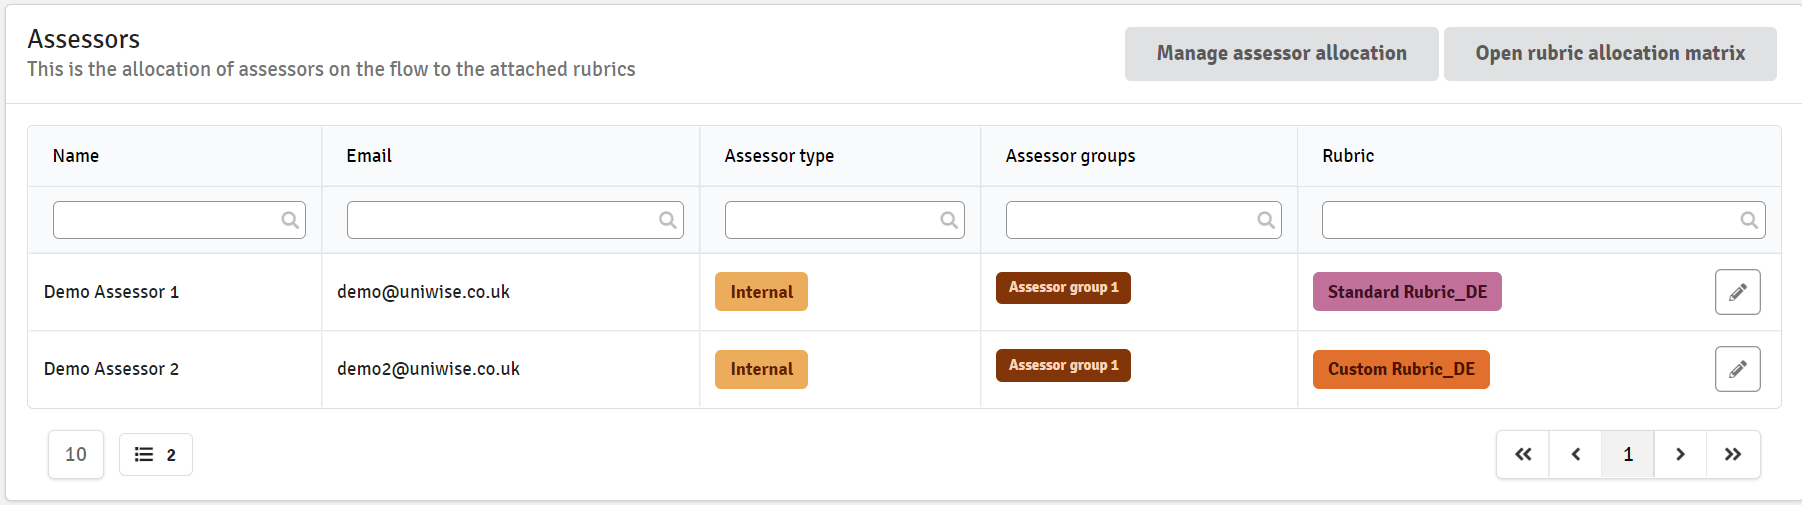 Assessor_Allocation_Overview.png